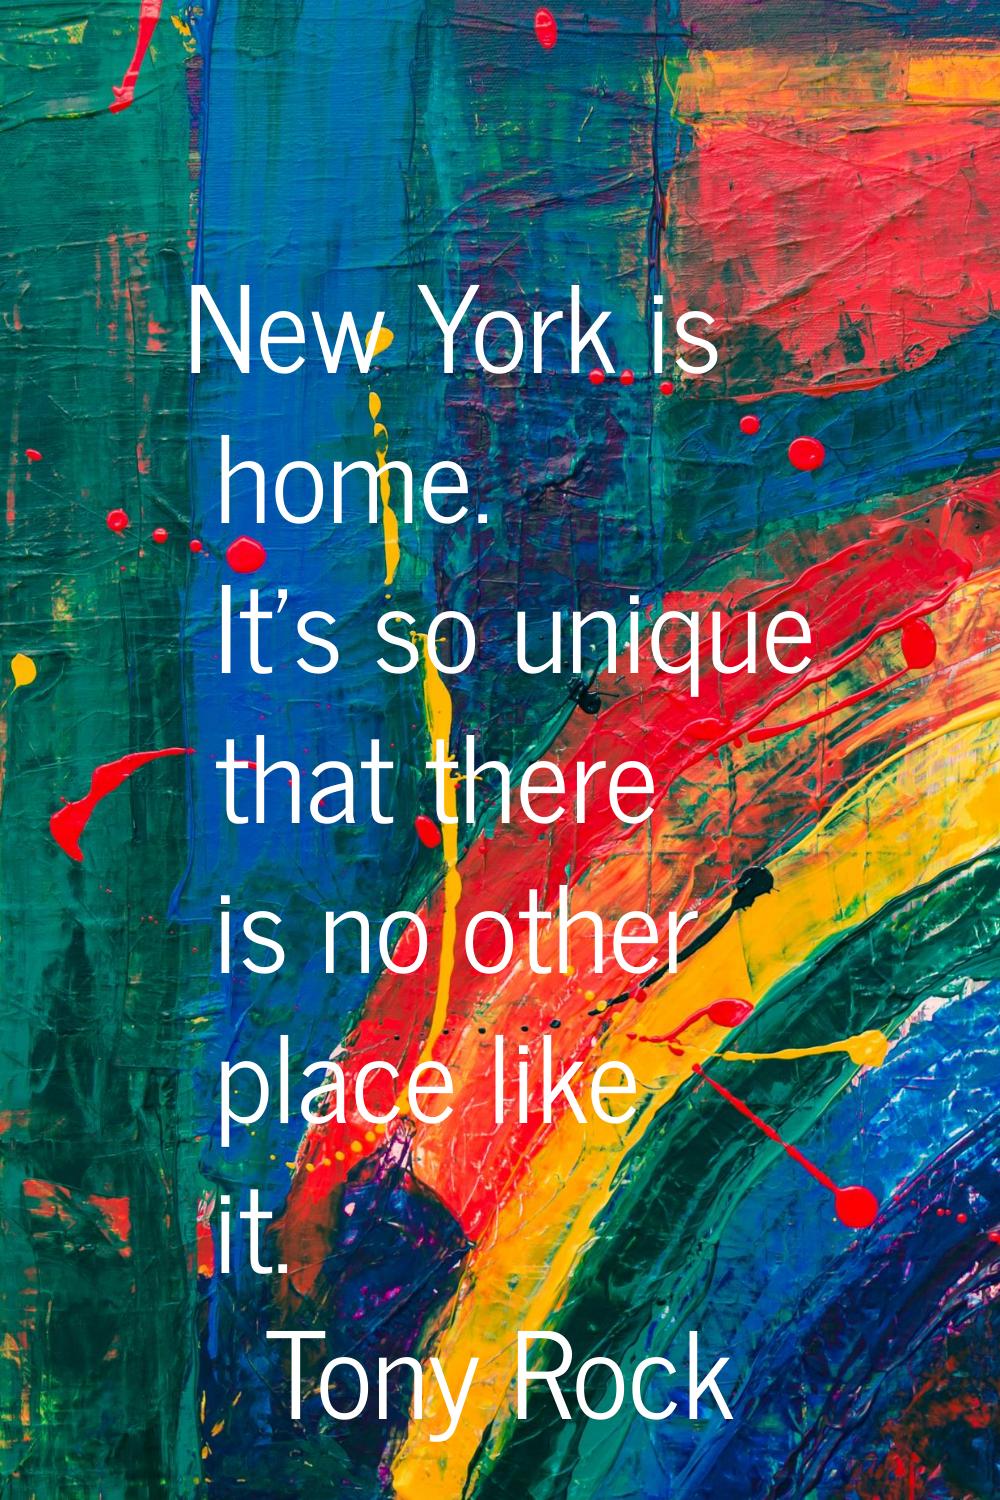 New York is home. It's so unique that there is no other place like it.